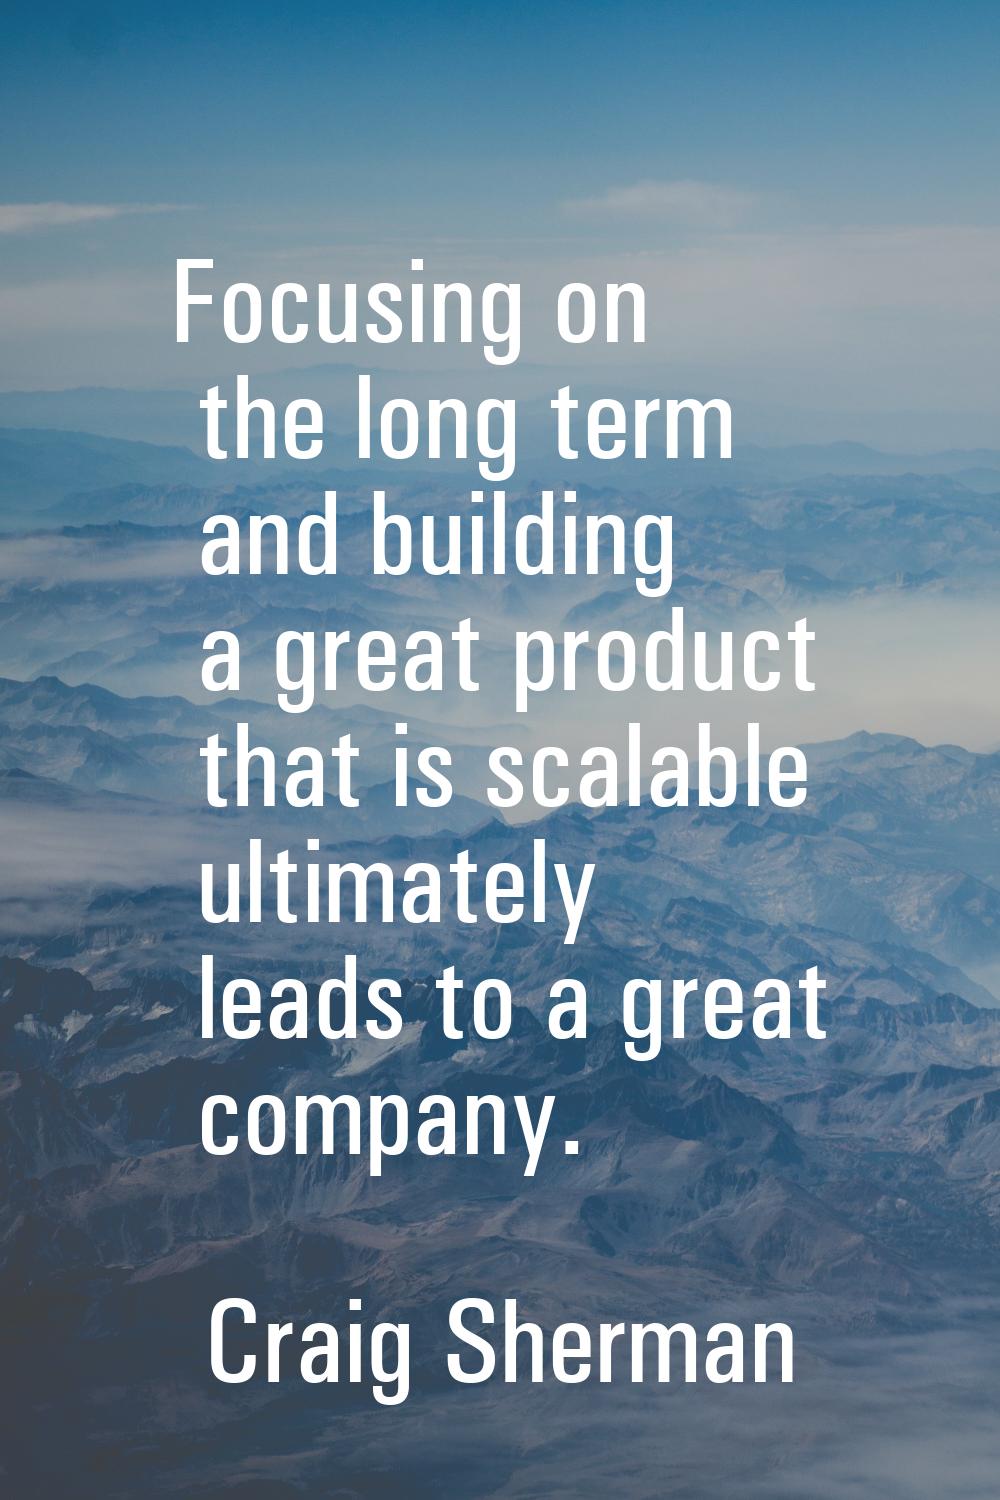 Focusing on the long term and building a great product that is scalable ultimately leads to a great